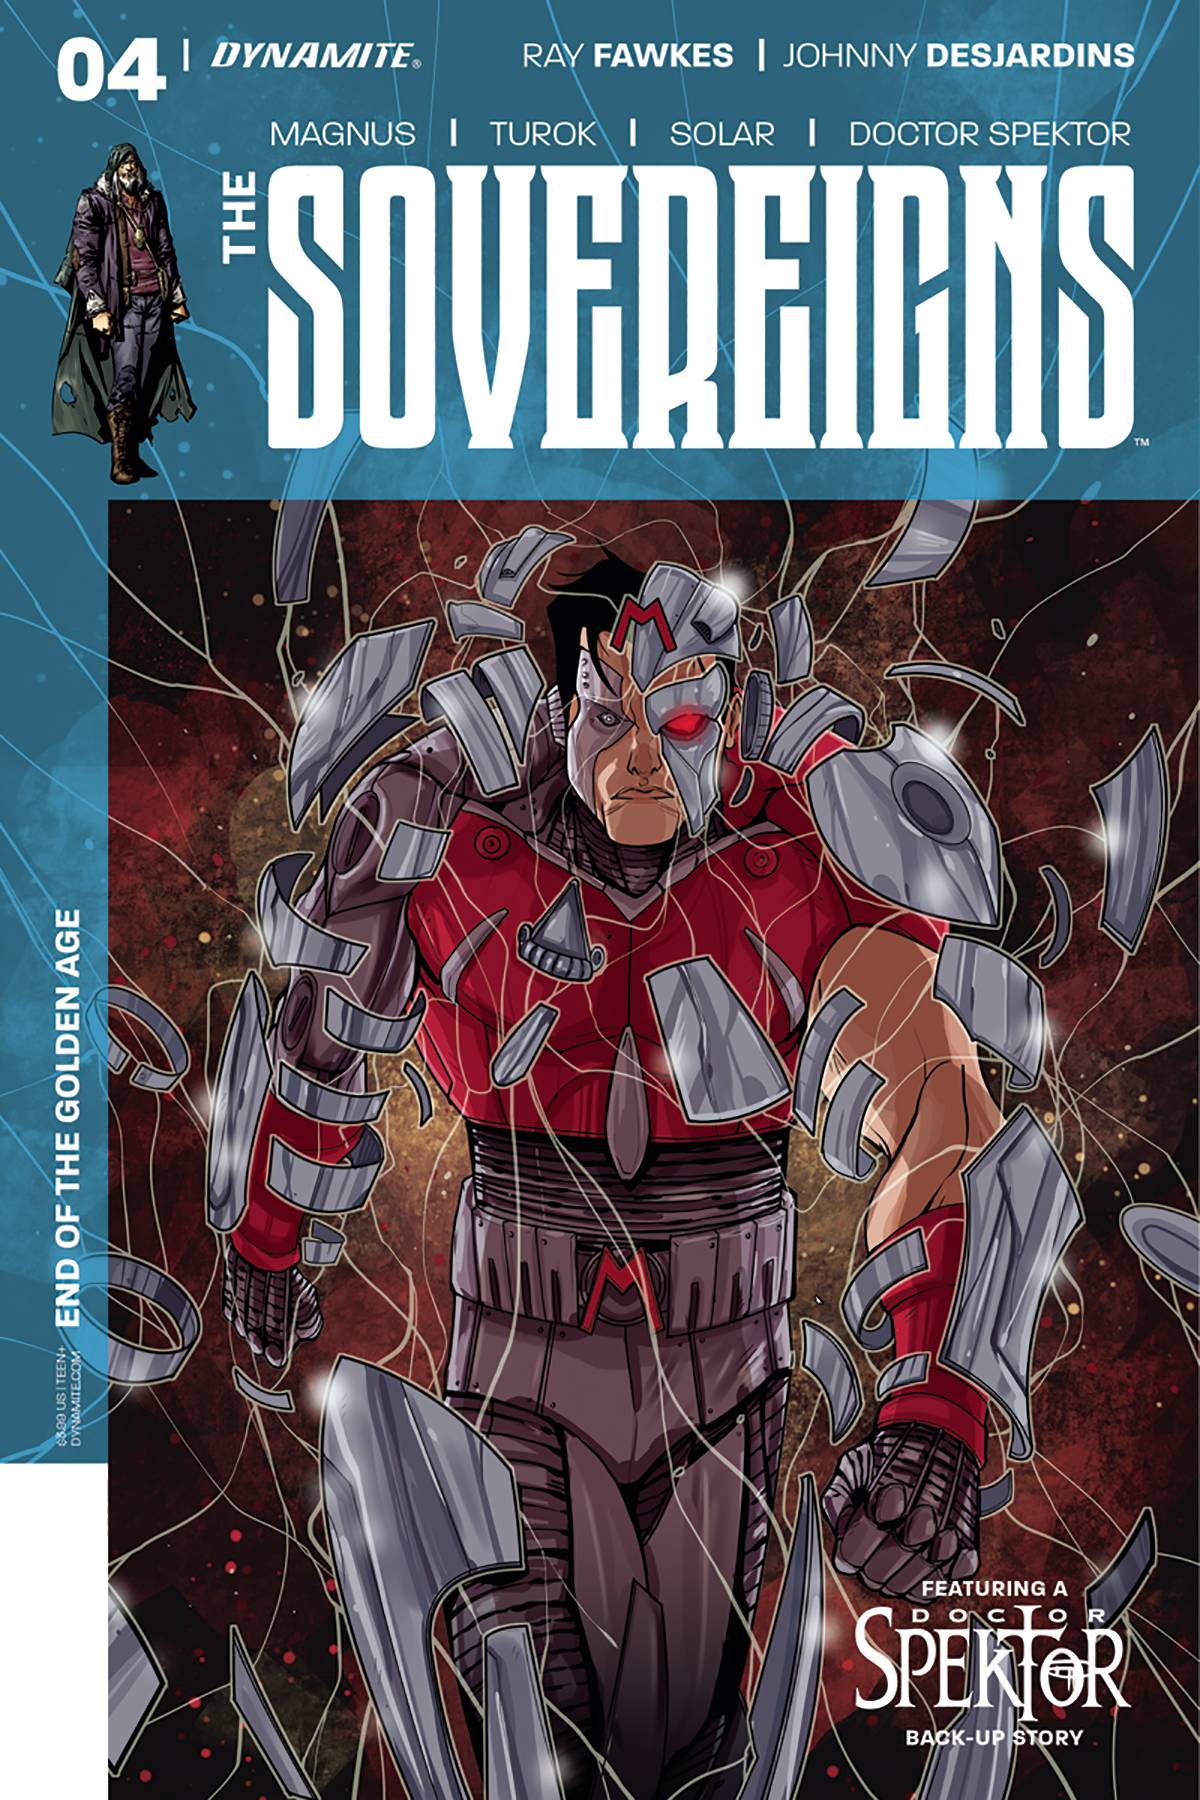 SOVEREIGNS#4